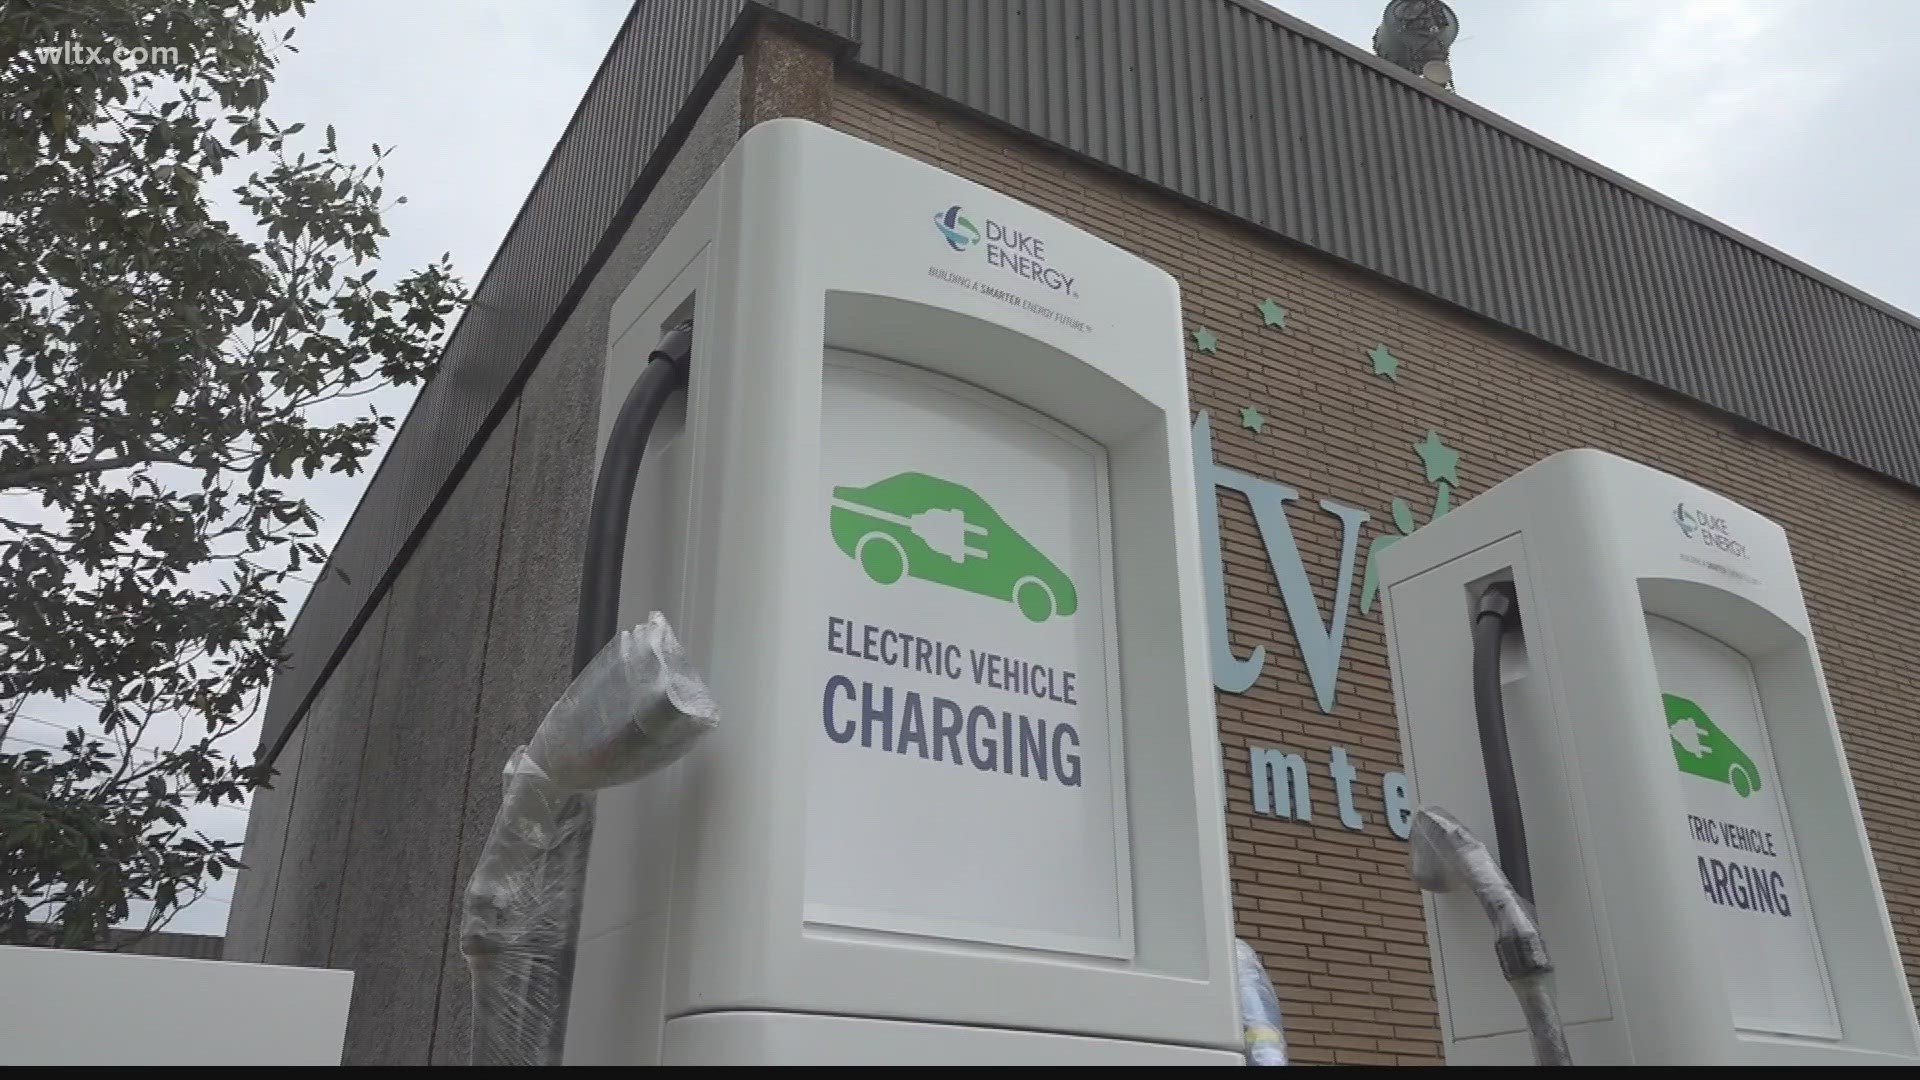 New charging stations are being installed in the downtown area.